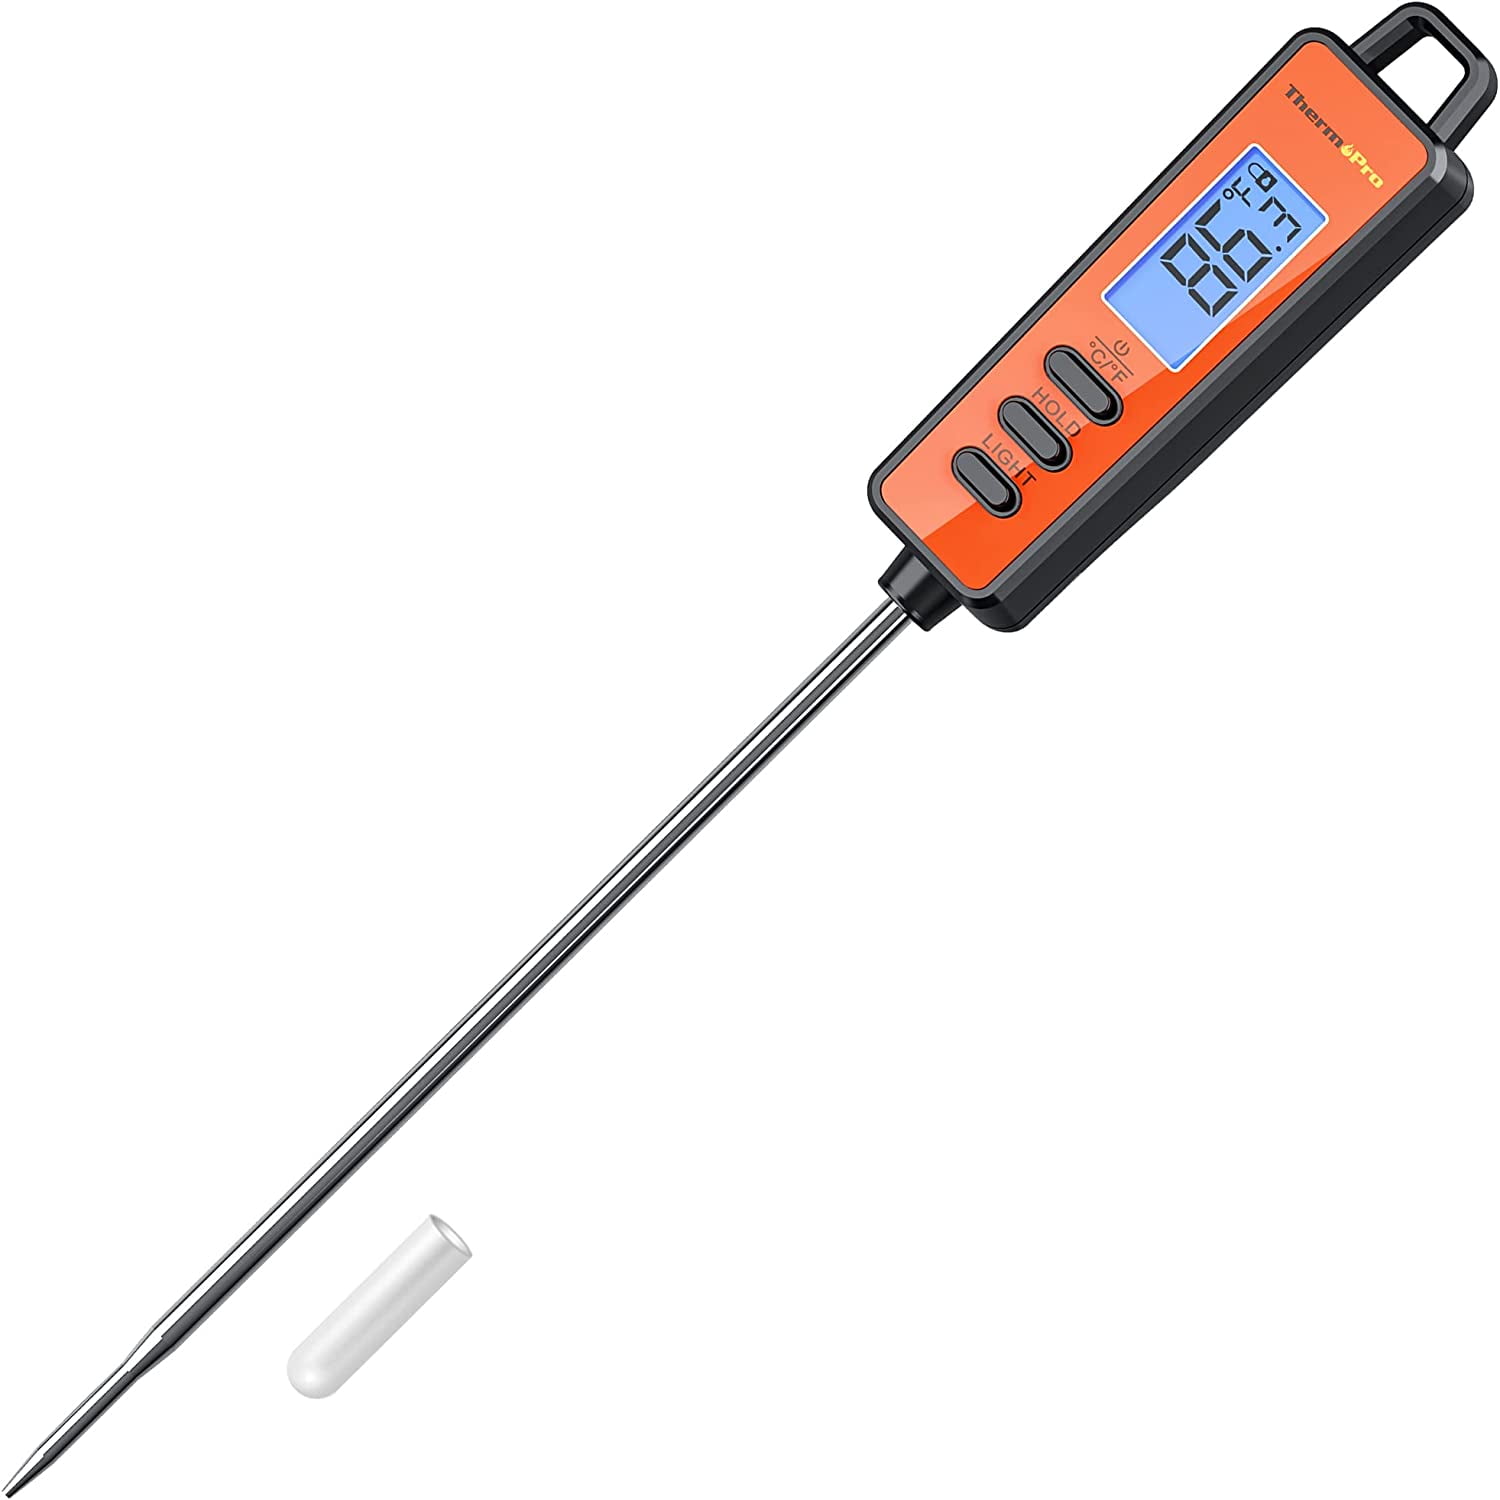 Mechanical Meat Thermometer 4690985 with 5 probe length (1-pink-1)